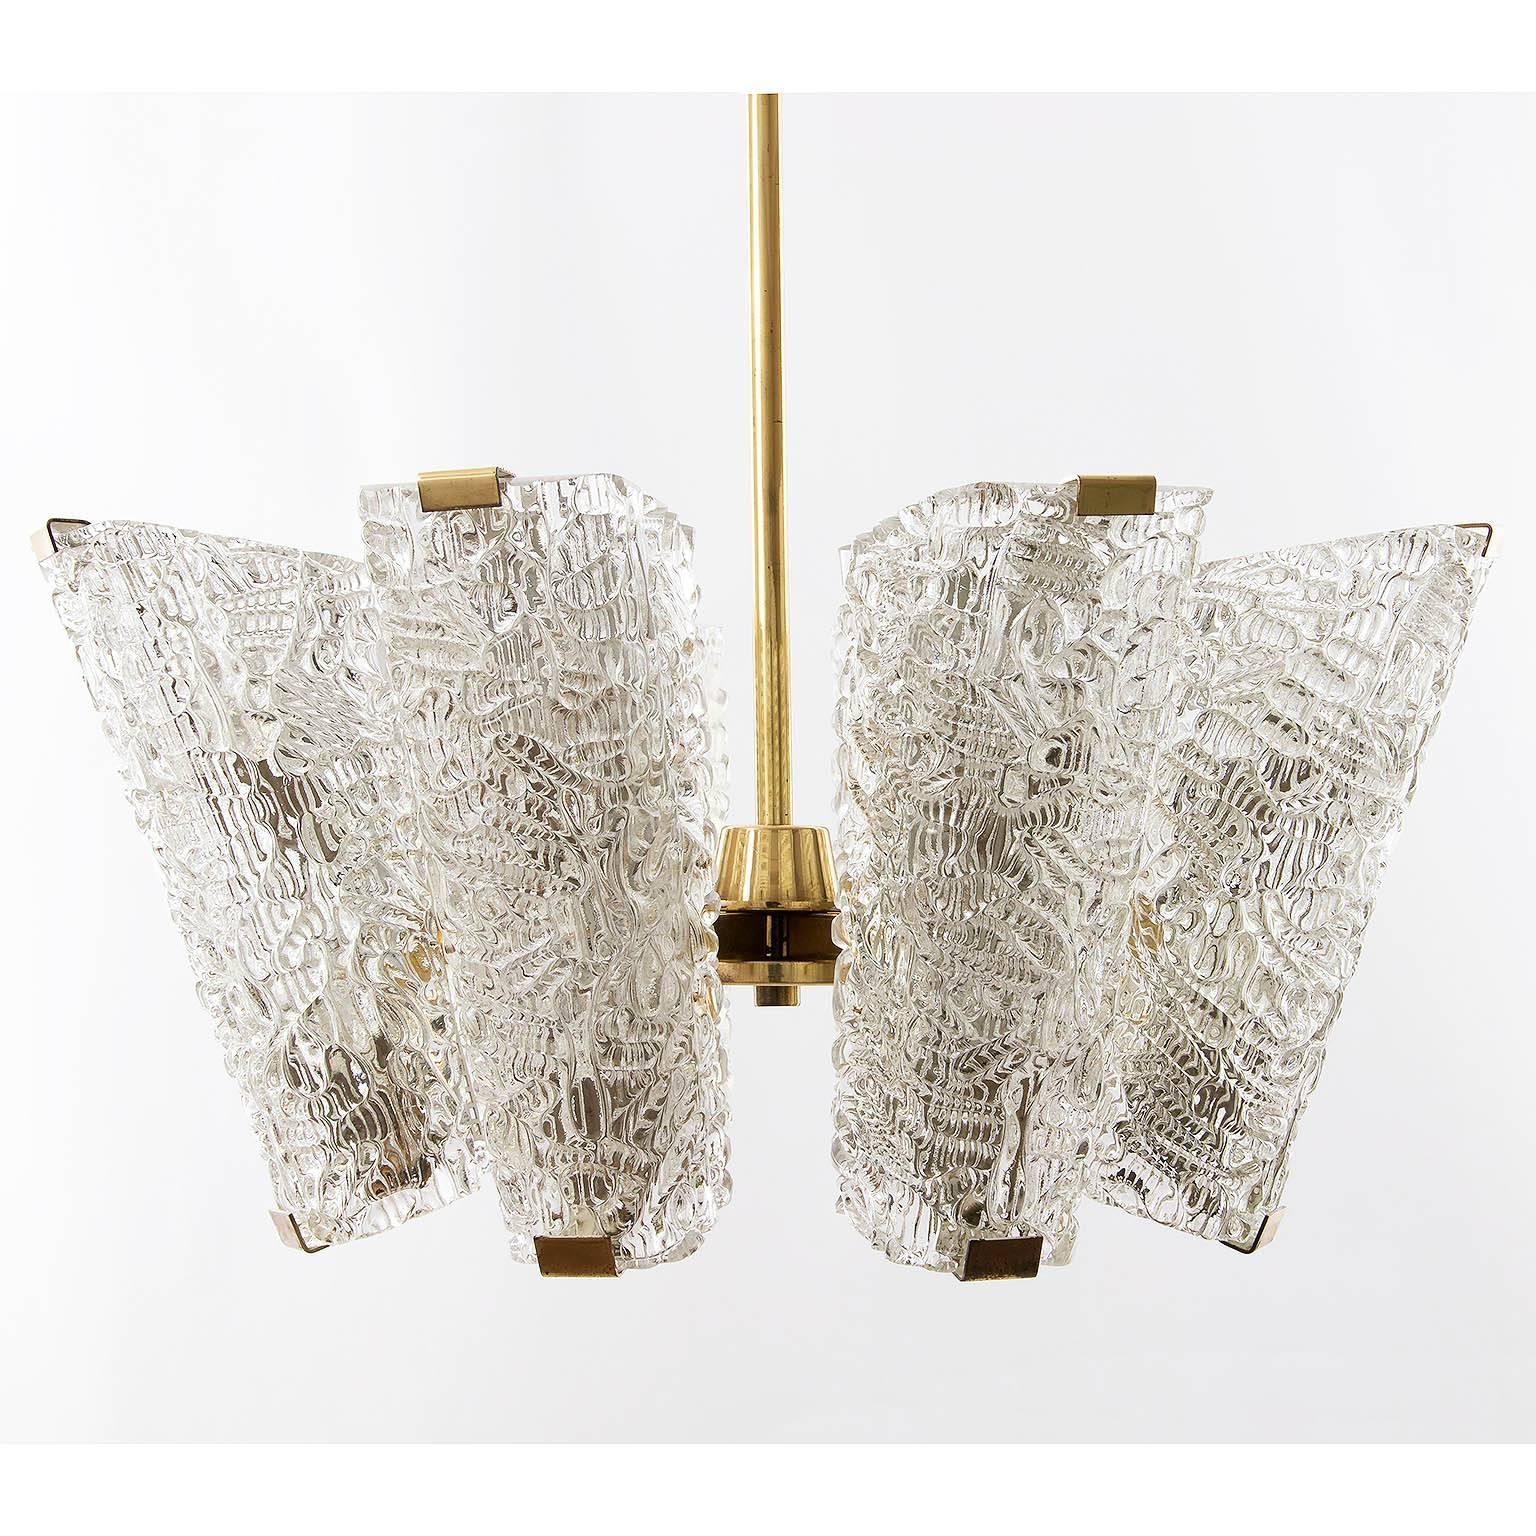 Austrian Large Kalmar Chandelier, Brass and Textured Glass, 1950s For Sale